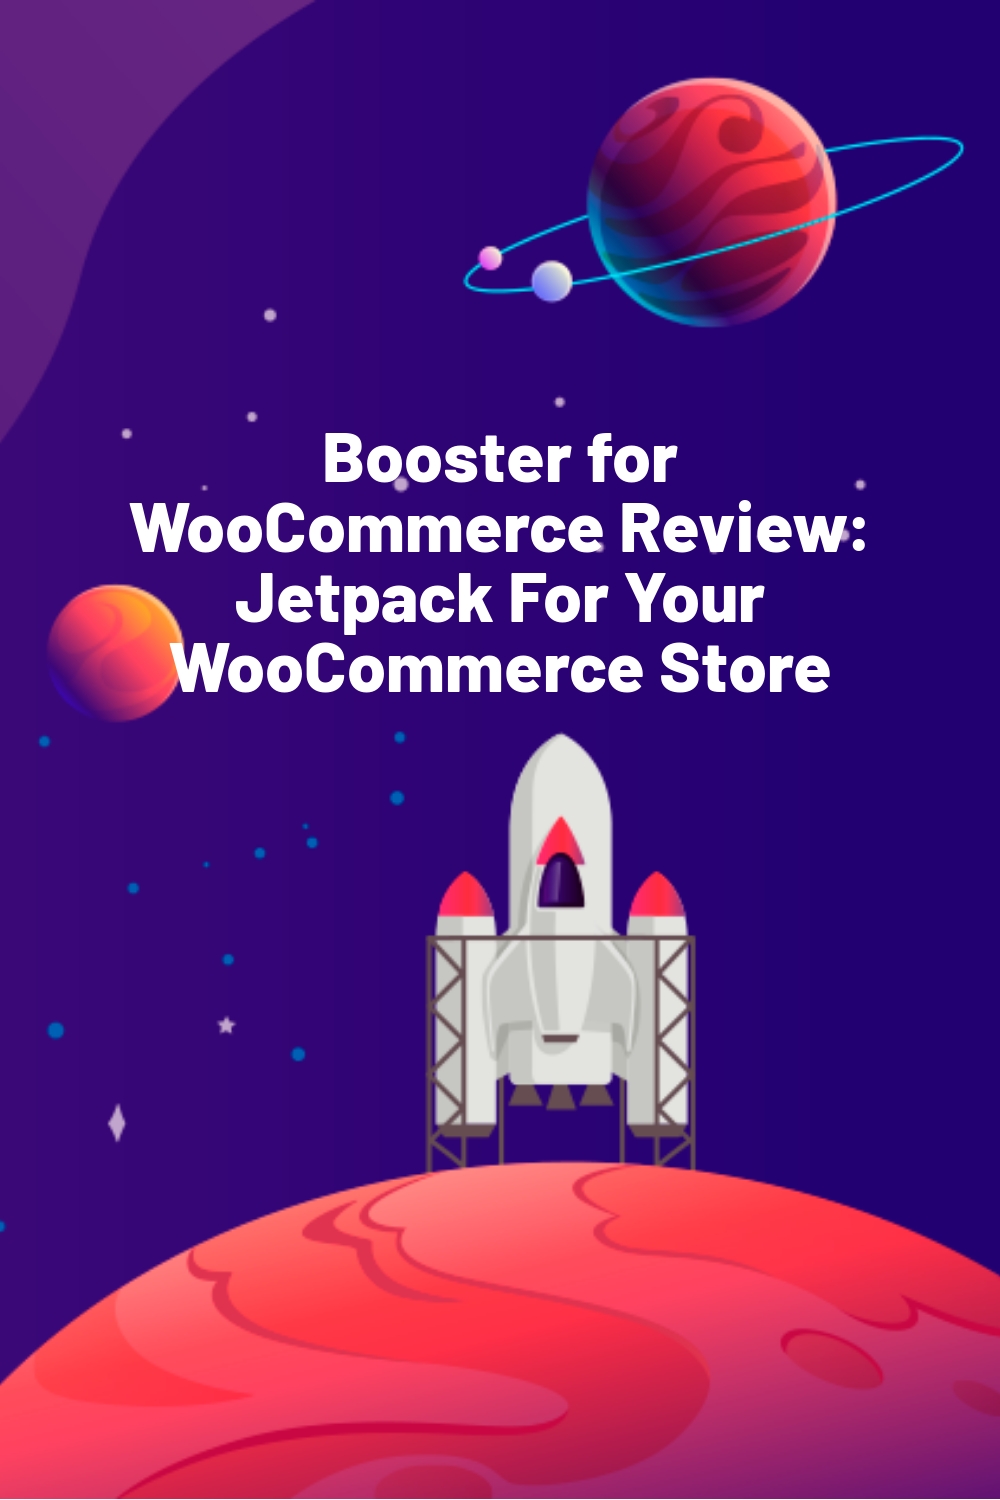 Booster for WooCommerce Review: Jetpack For Your WooCommerce Store